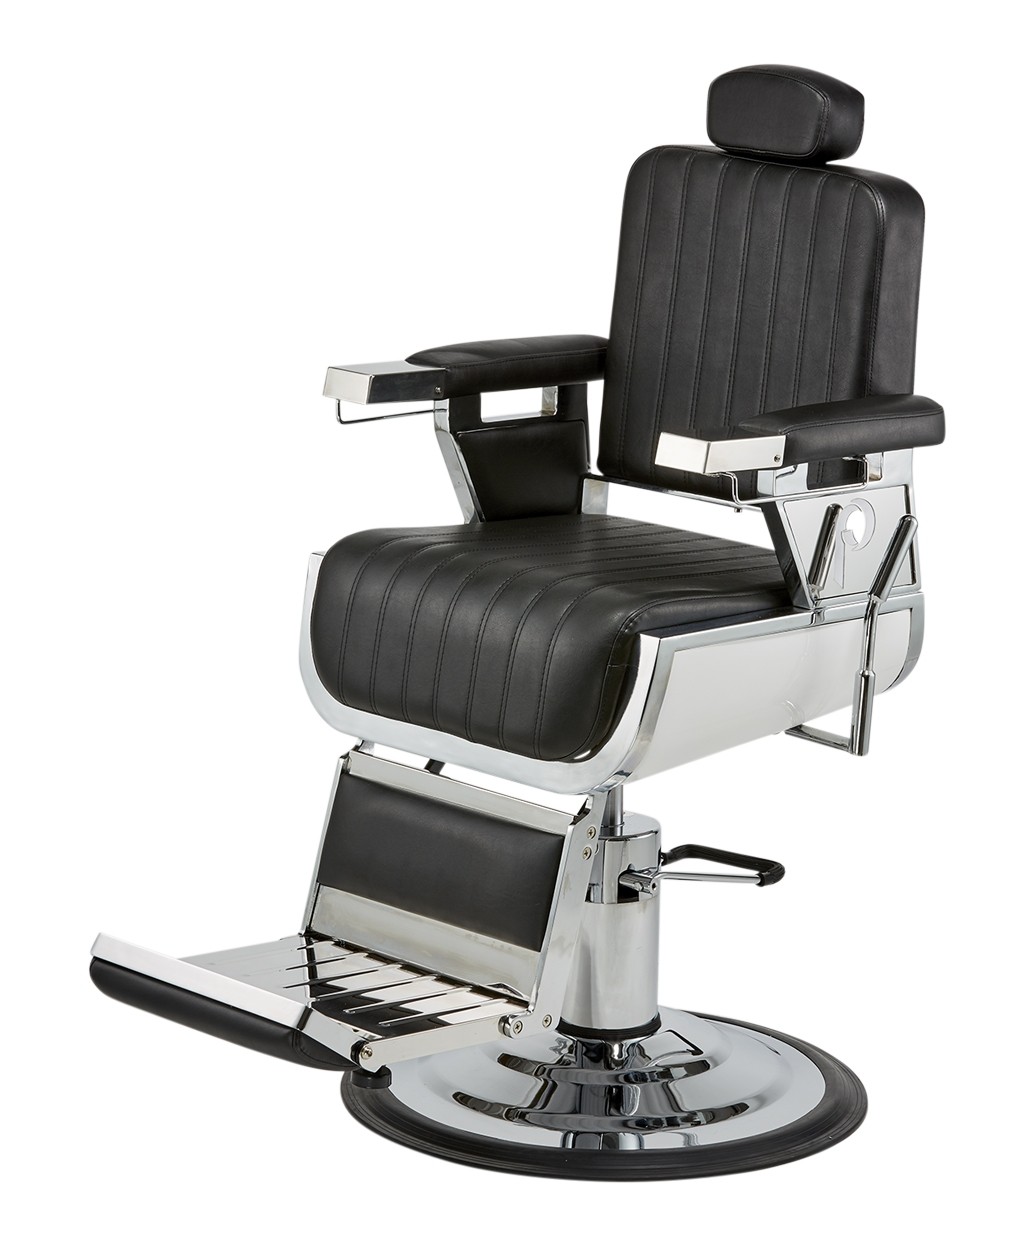 Pibbs barber chair Black with headrest up - PIB-660